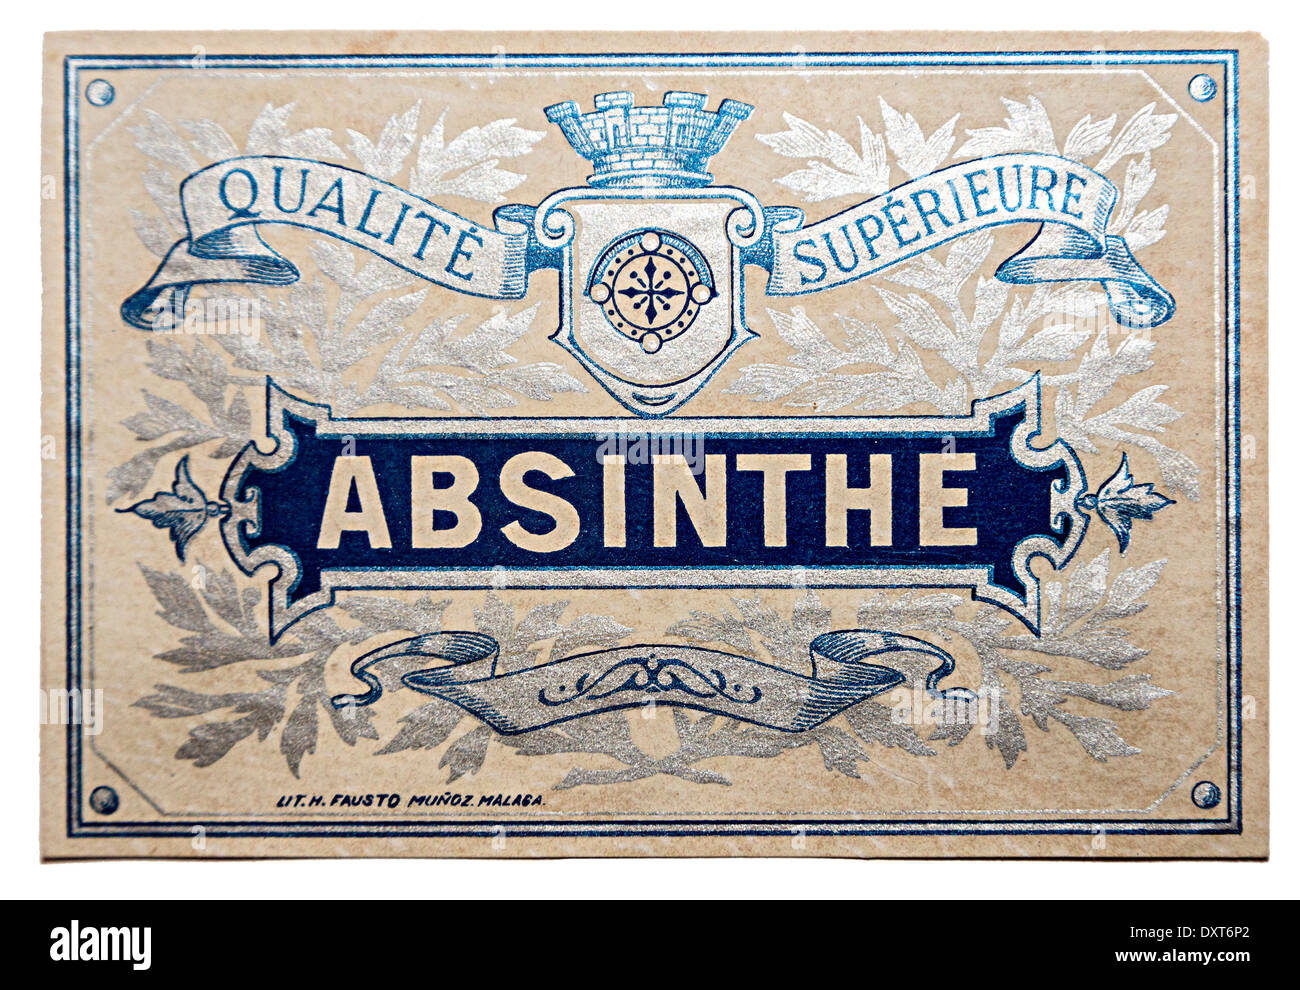 Absinthe label Canary Islands, Spain Stock Photo